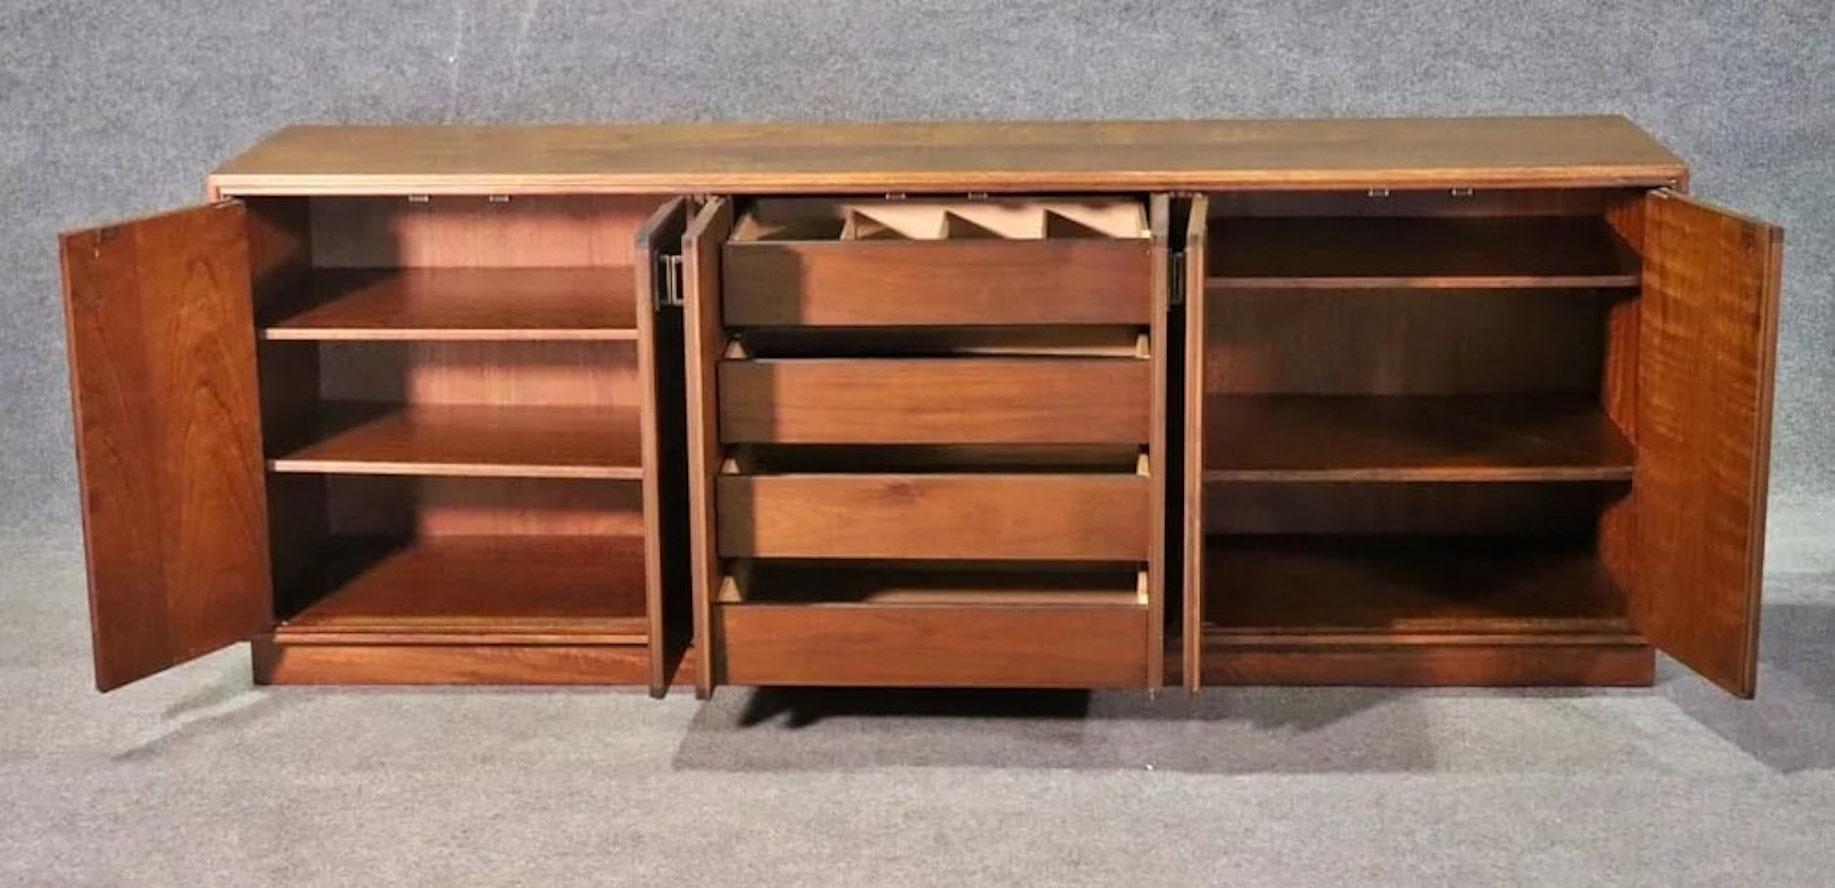 Mid-century modern long cabinet by Founders with parquet diamond style front panels. Two side cabinets with shelves and middle drawers. Great 1960s design and construction.
Please confirm location NY or NJ